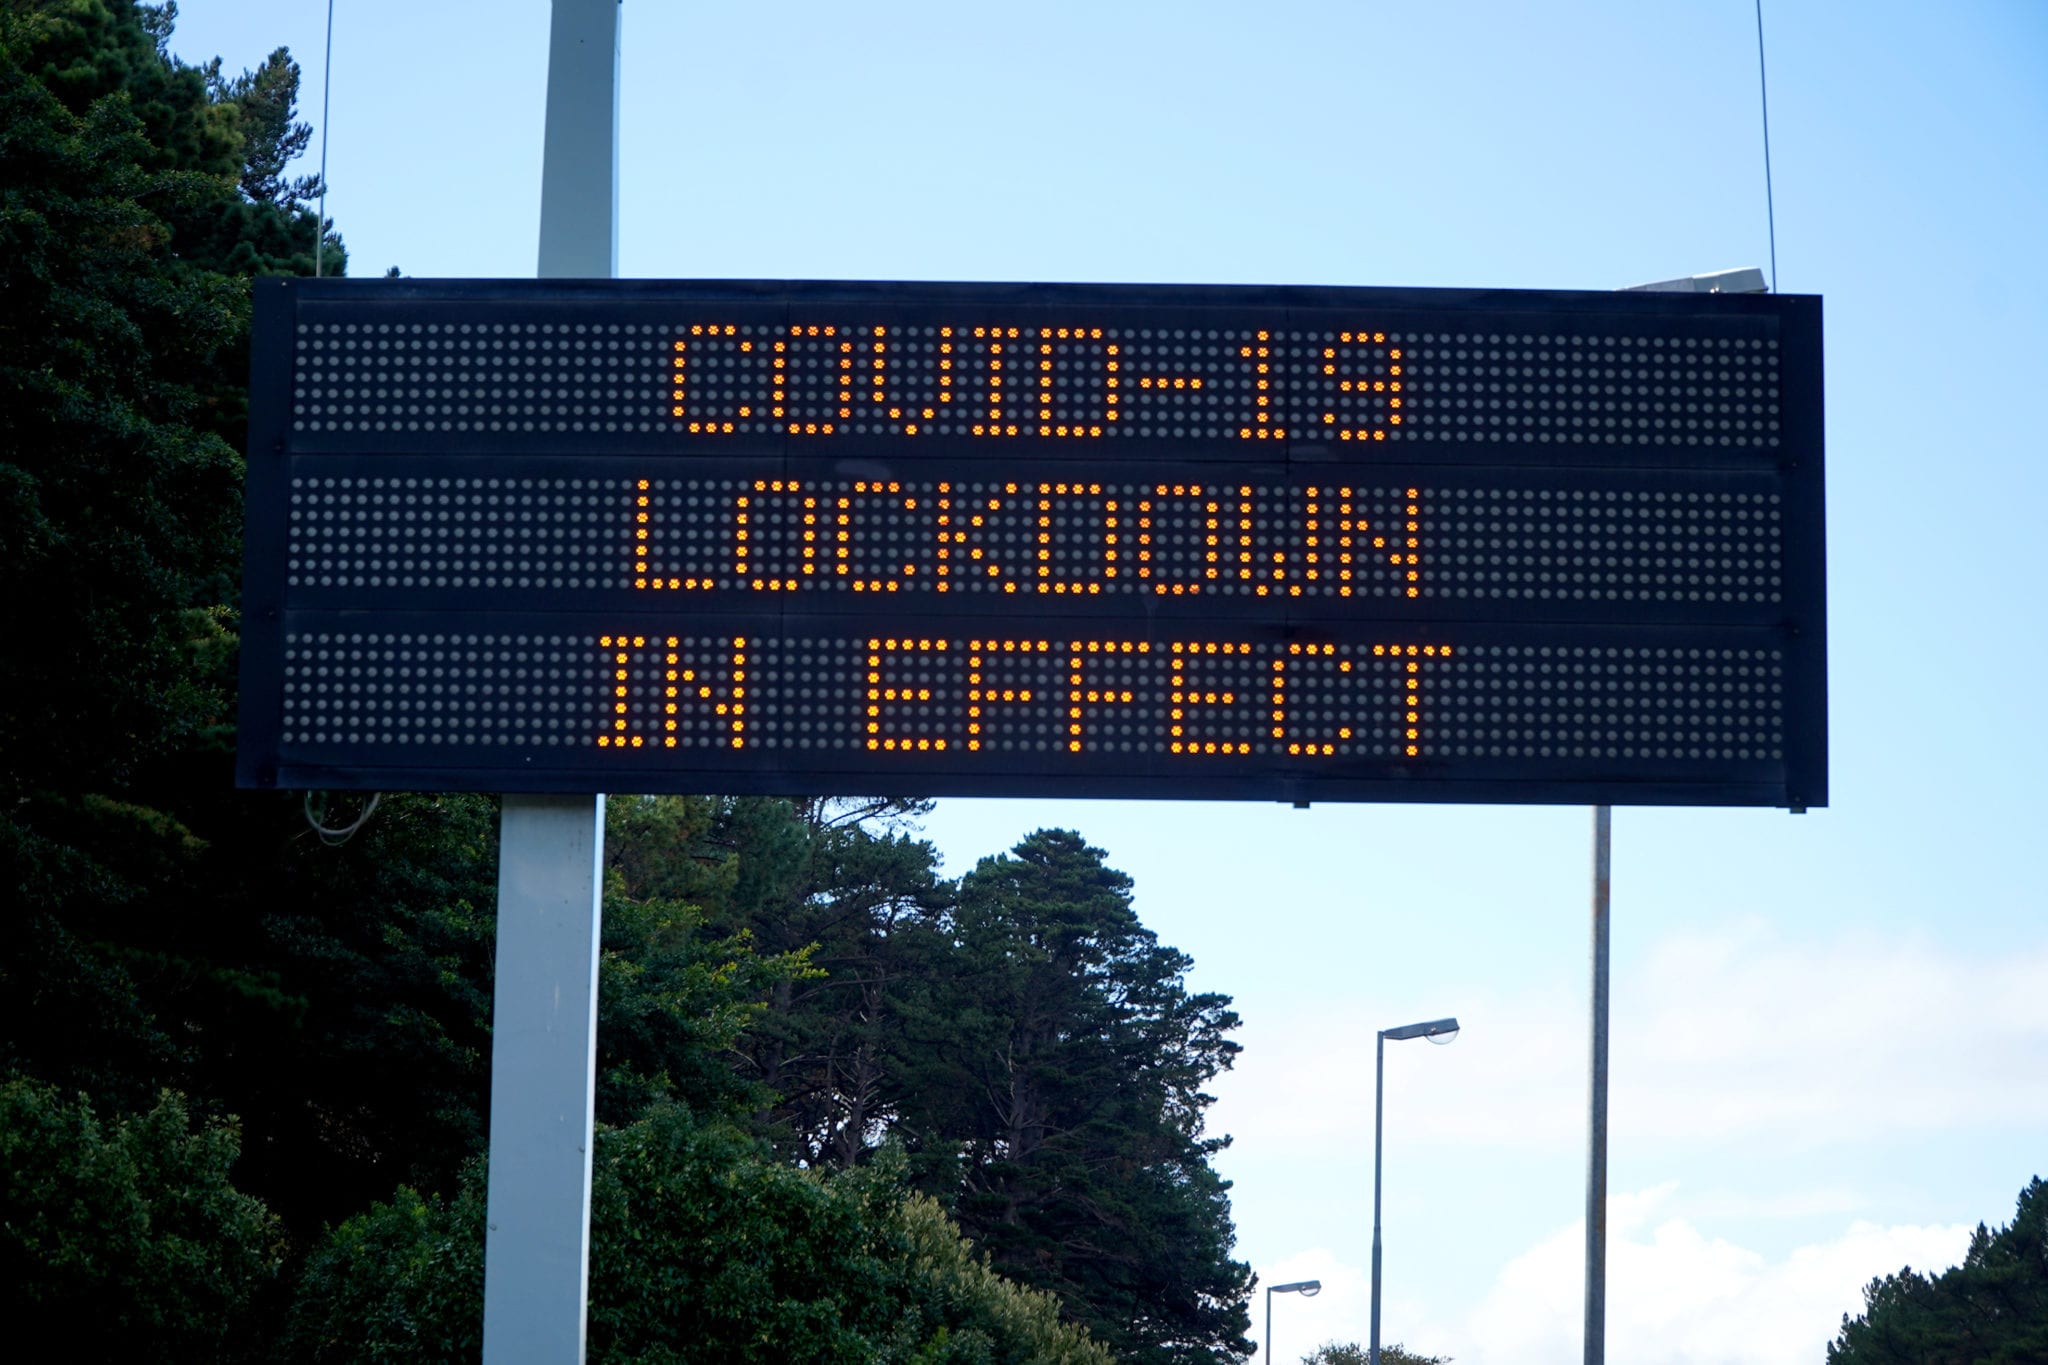 a warning sign during the lock down